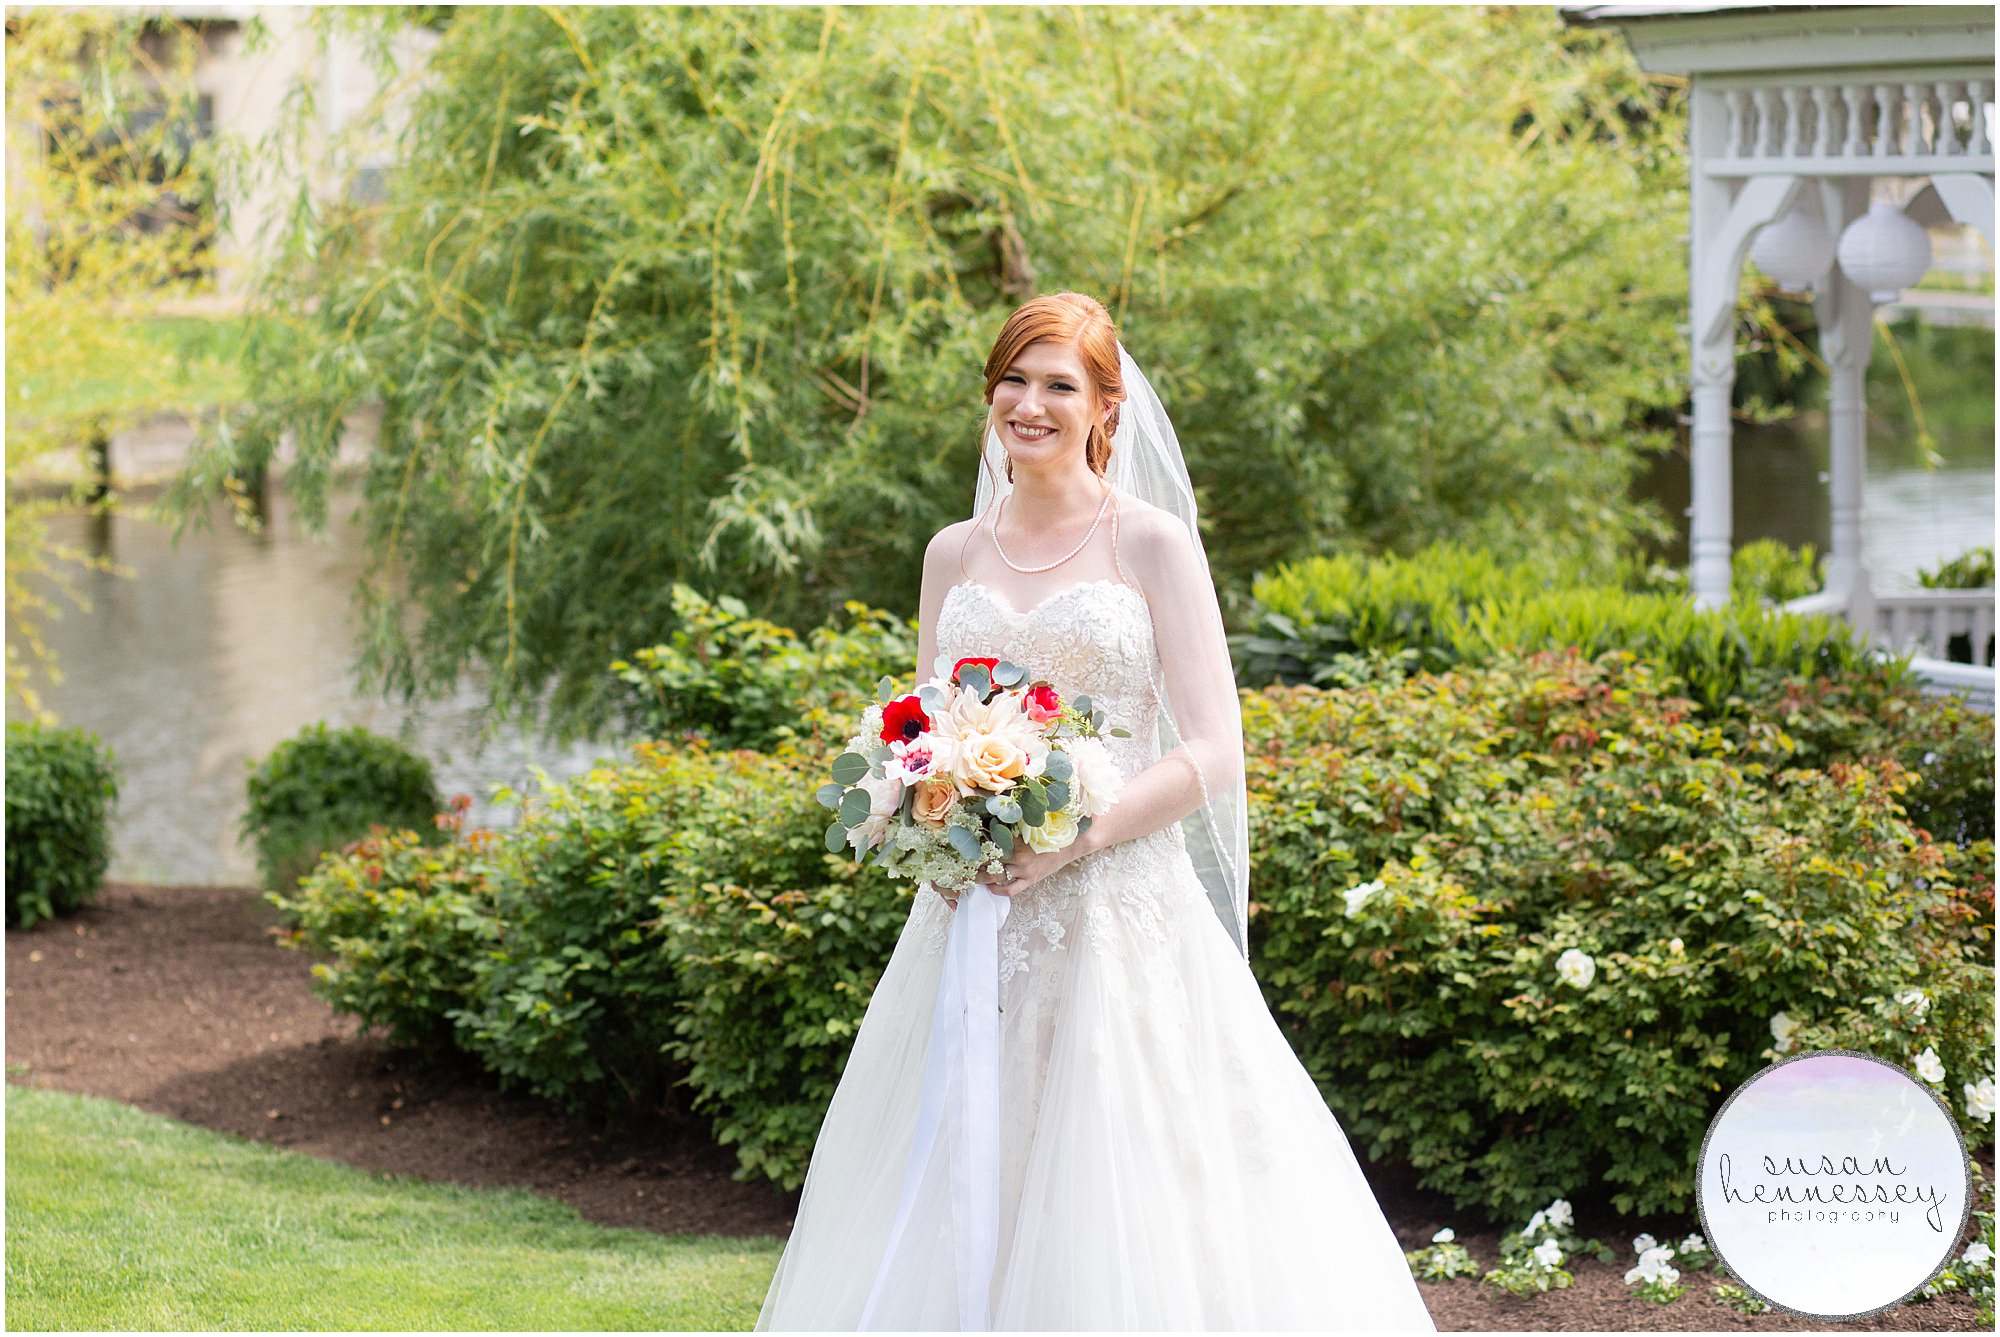 Bridal portraits at a Spring wedding in Somers Point.